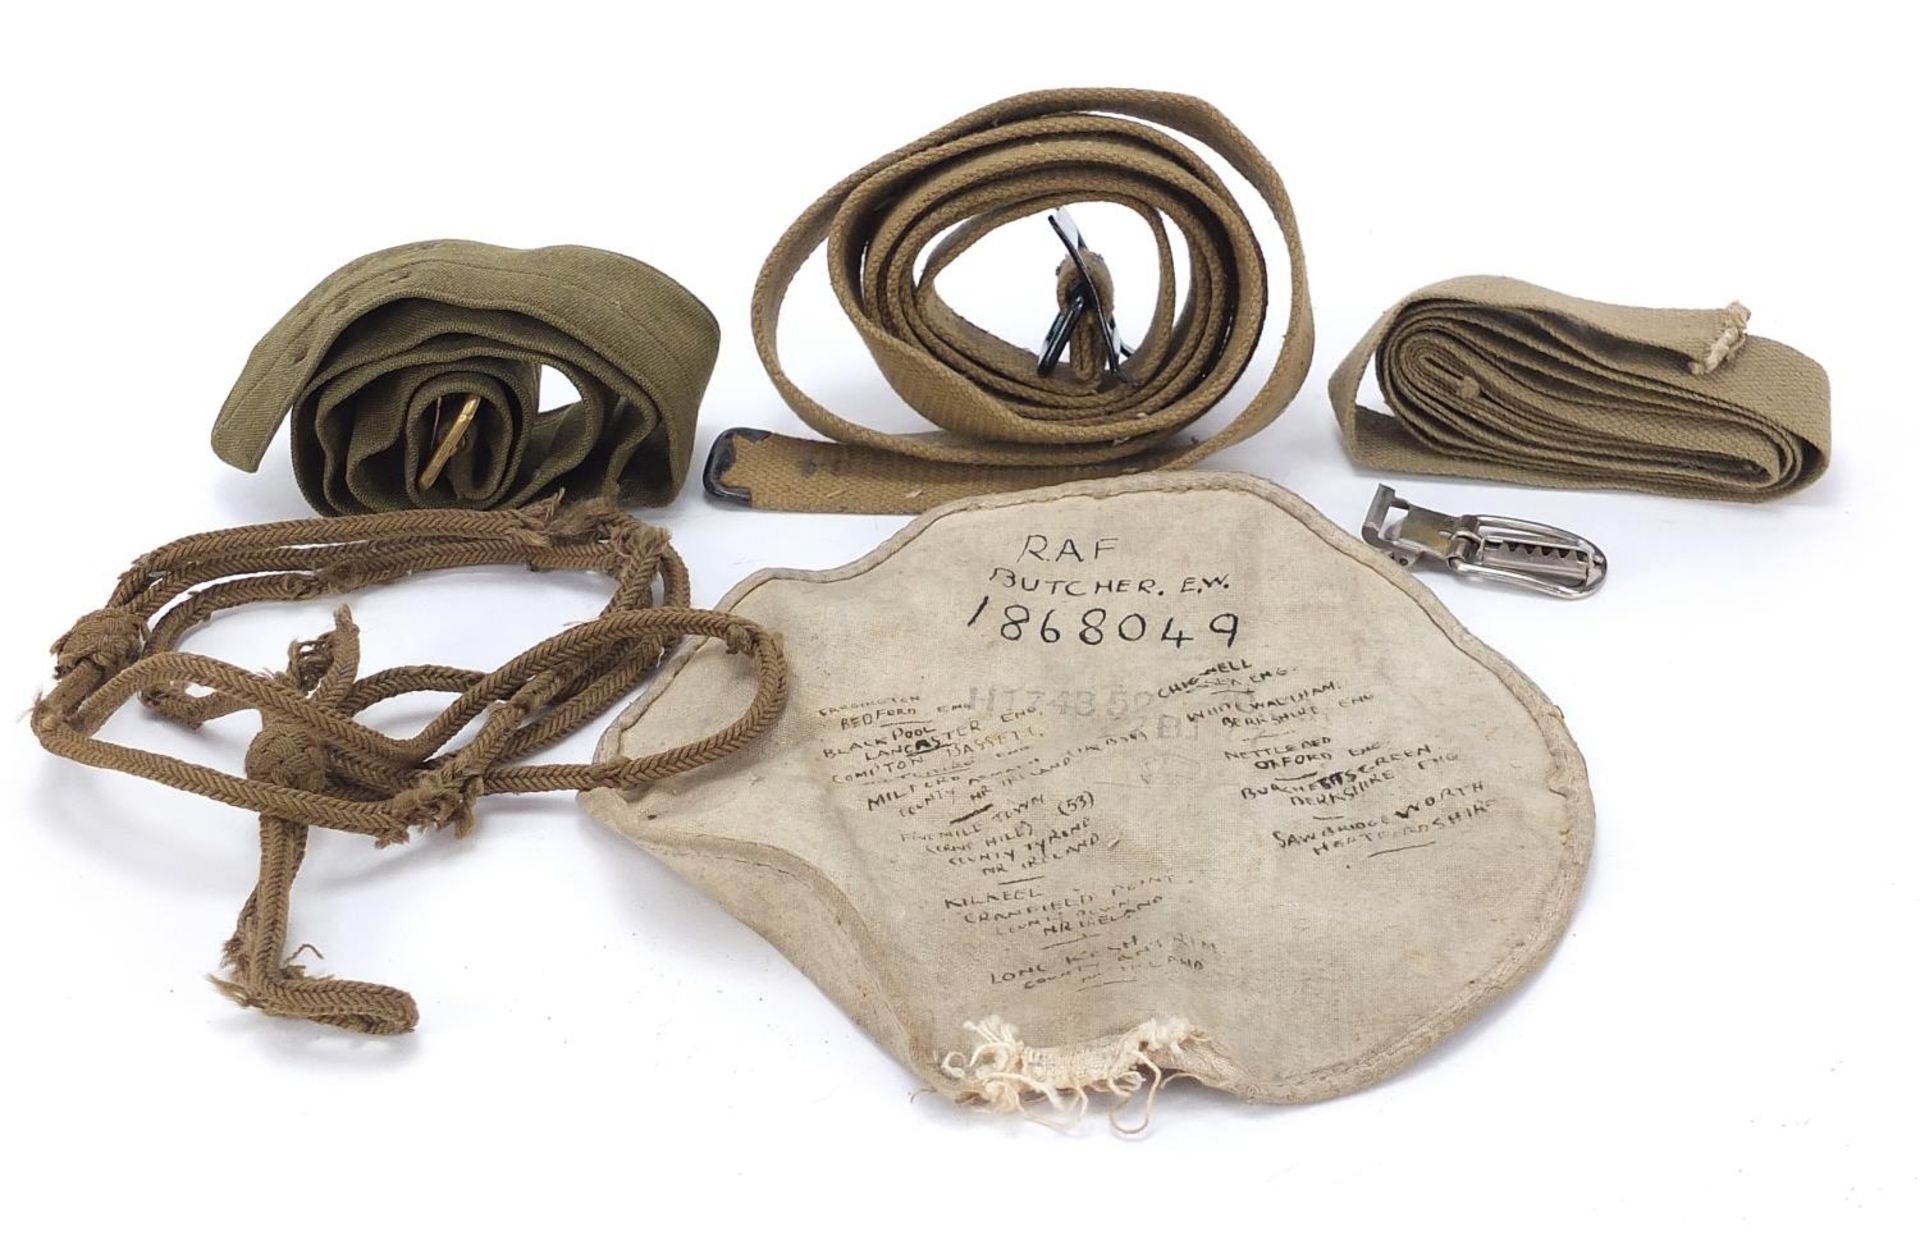 Militaria including canvas belts and material inscribed RAF Butcher EW 1868049